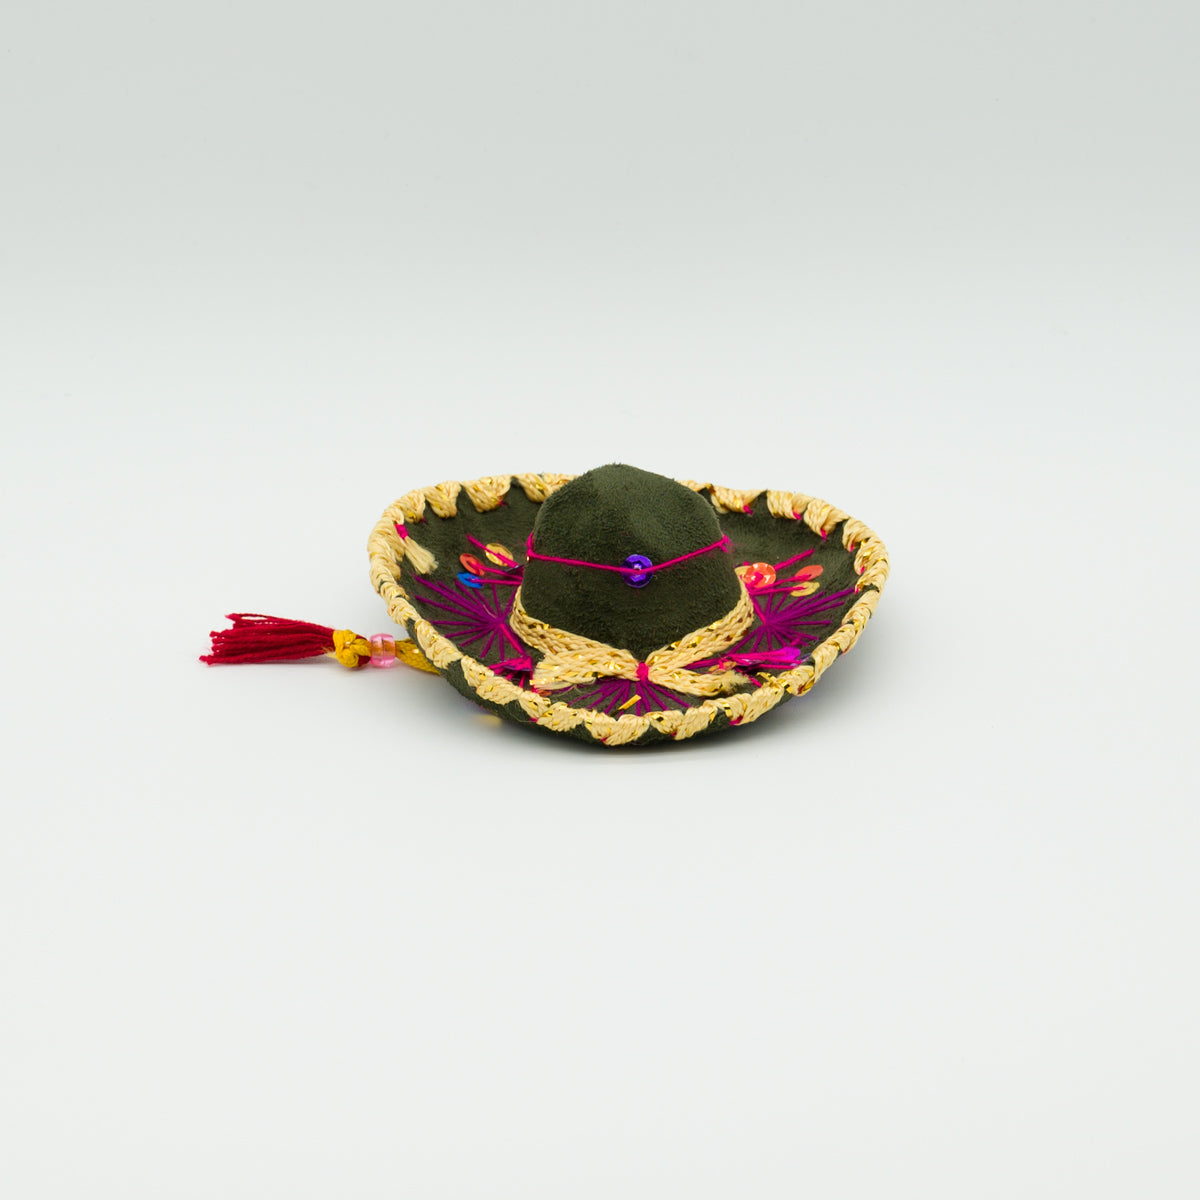 Pet-sized sombrero, because every pet deserves to join the fiesta!